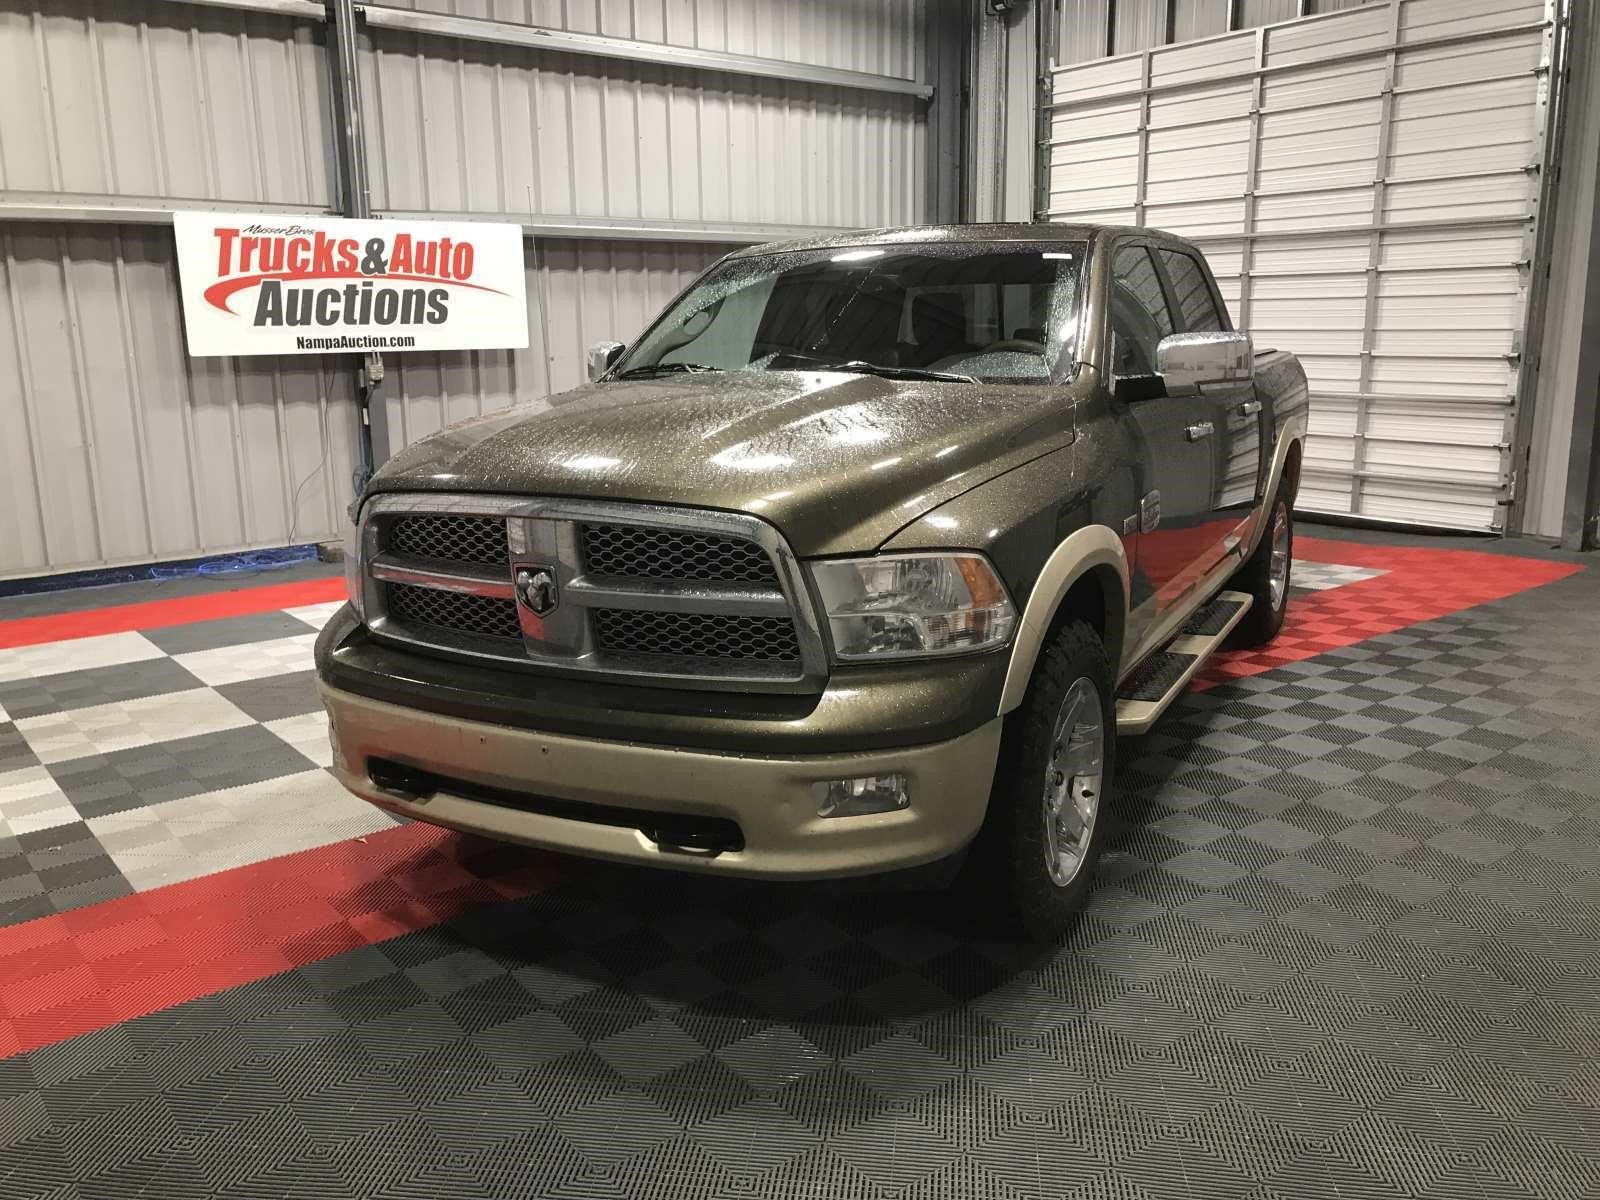 01182018 Trucks and Auto Auction